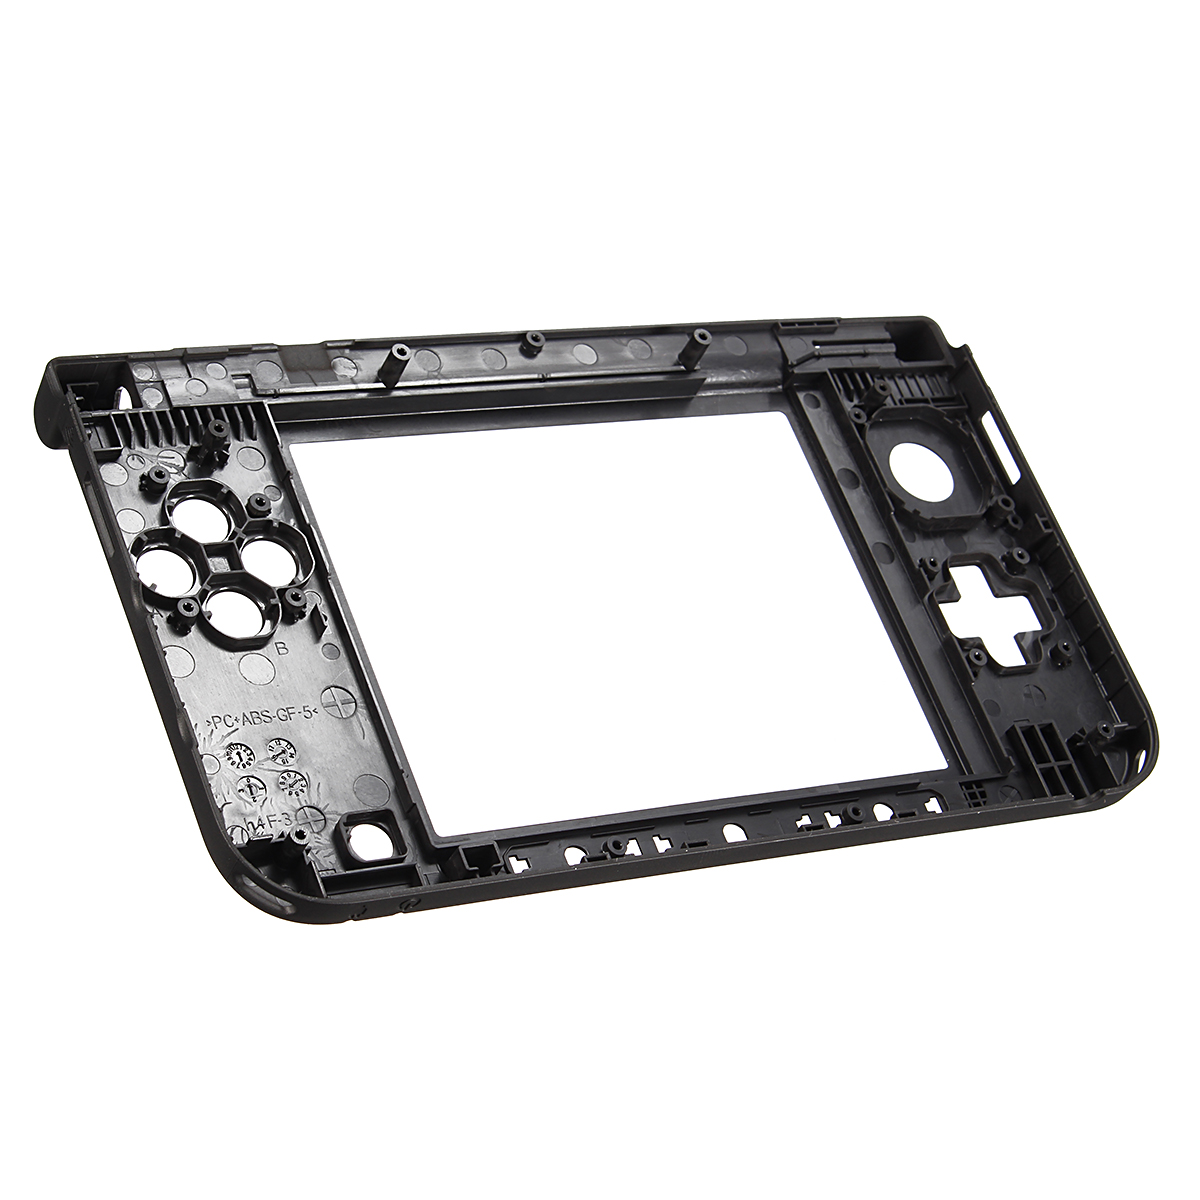 Replacement Bottom Middle Frame Housing Shell Cover Case for Nintendo 3DS XL 3DS LL Game Console 53